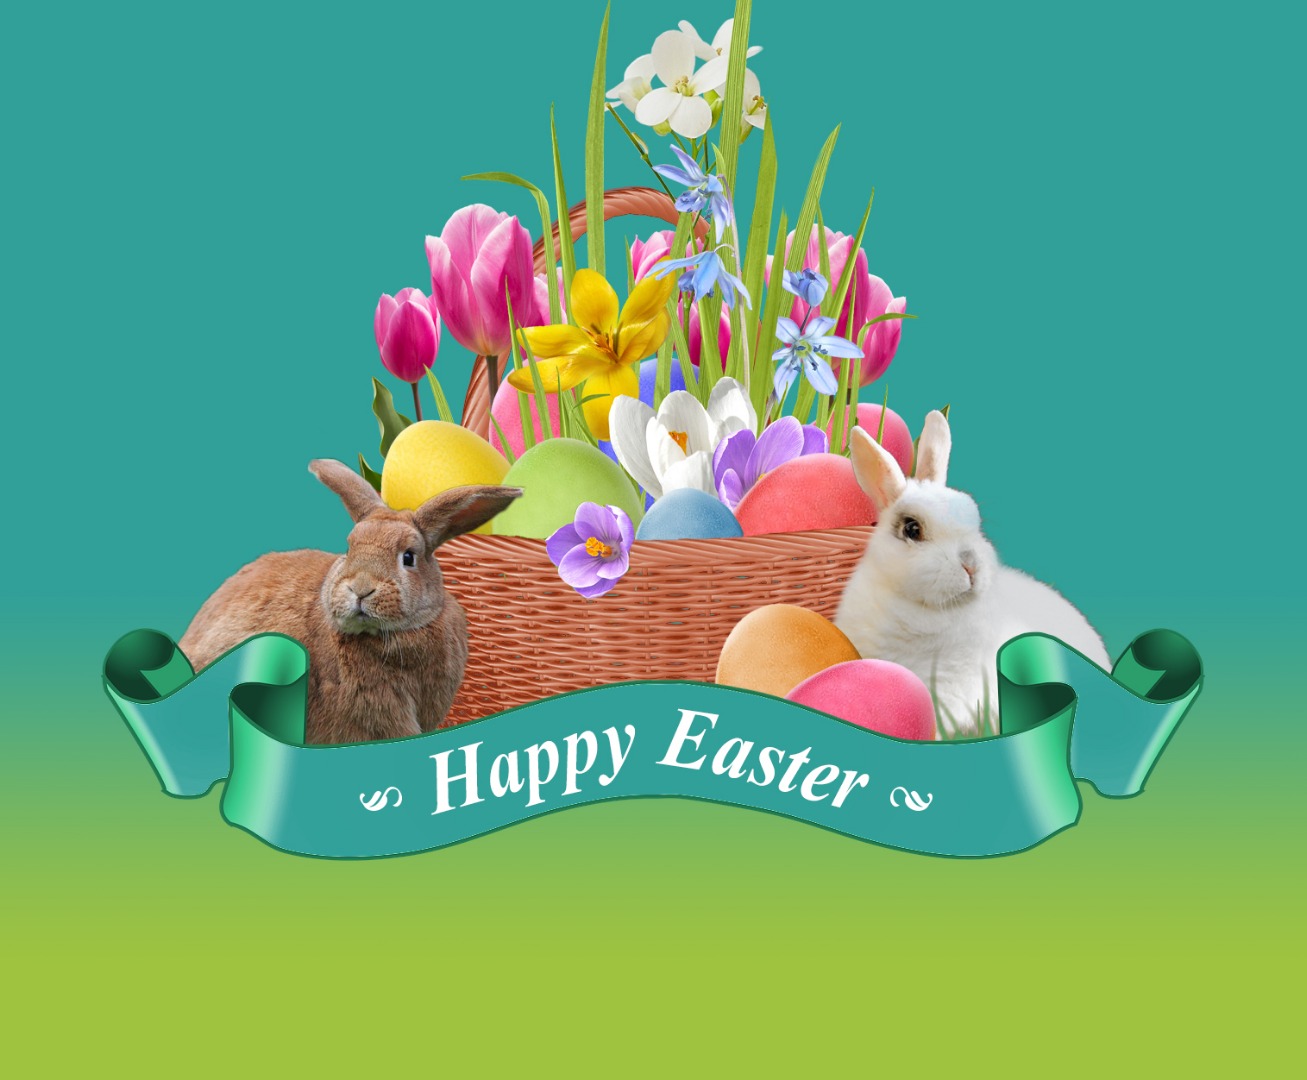 🌷Happy Easter 🐰- Happy Spring 🌷 Image